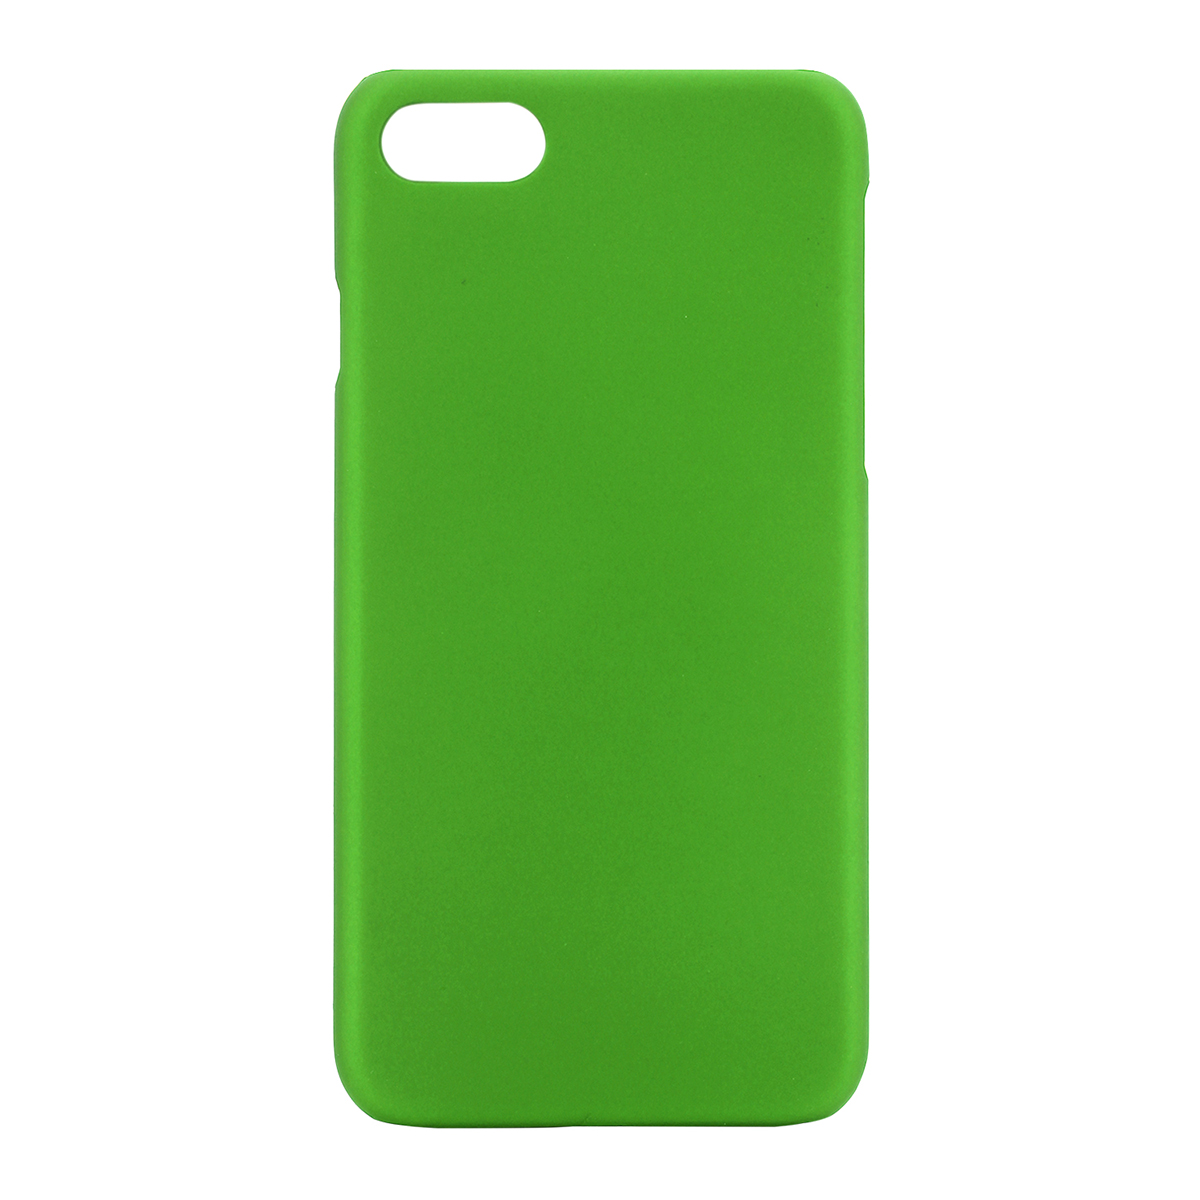 Multicolor Frosted Hard PC Protective Back Phone Case for iPhone 7 - Green